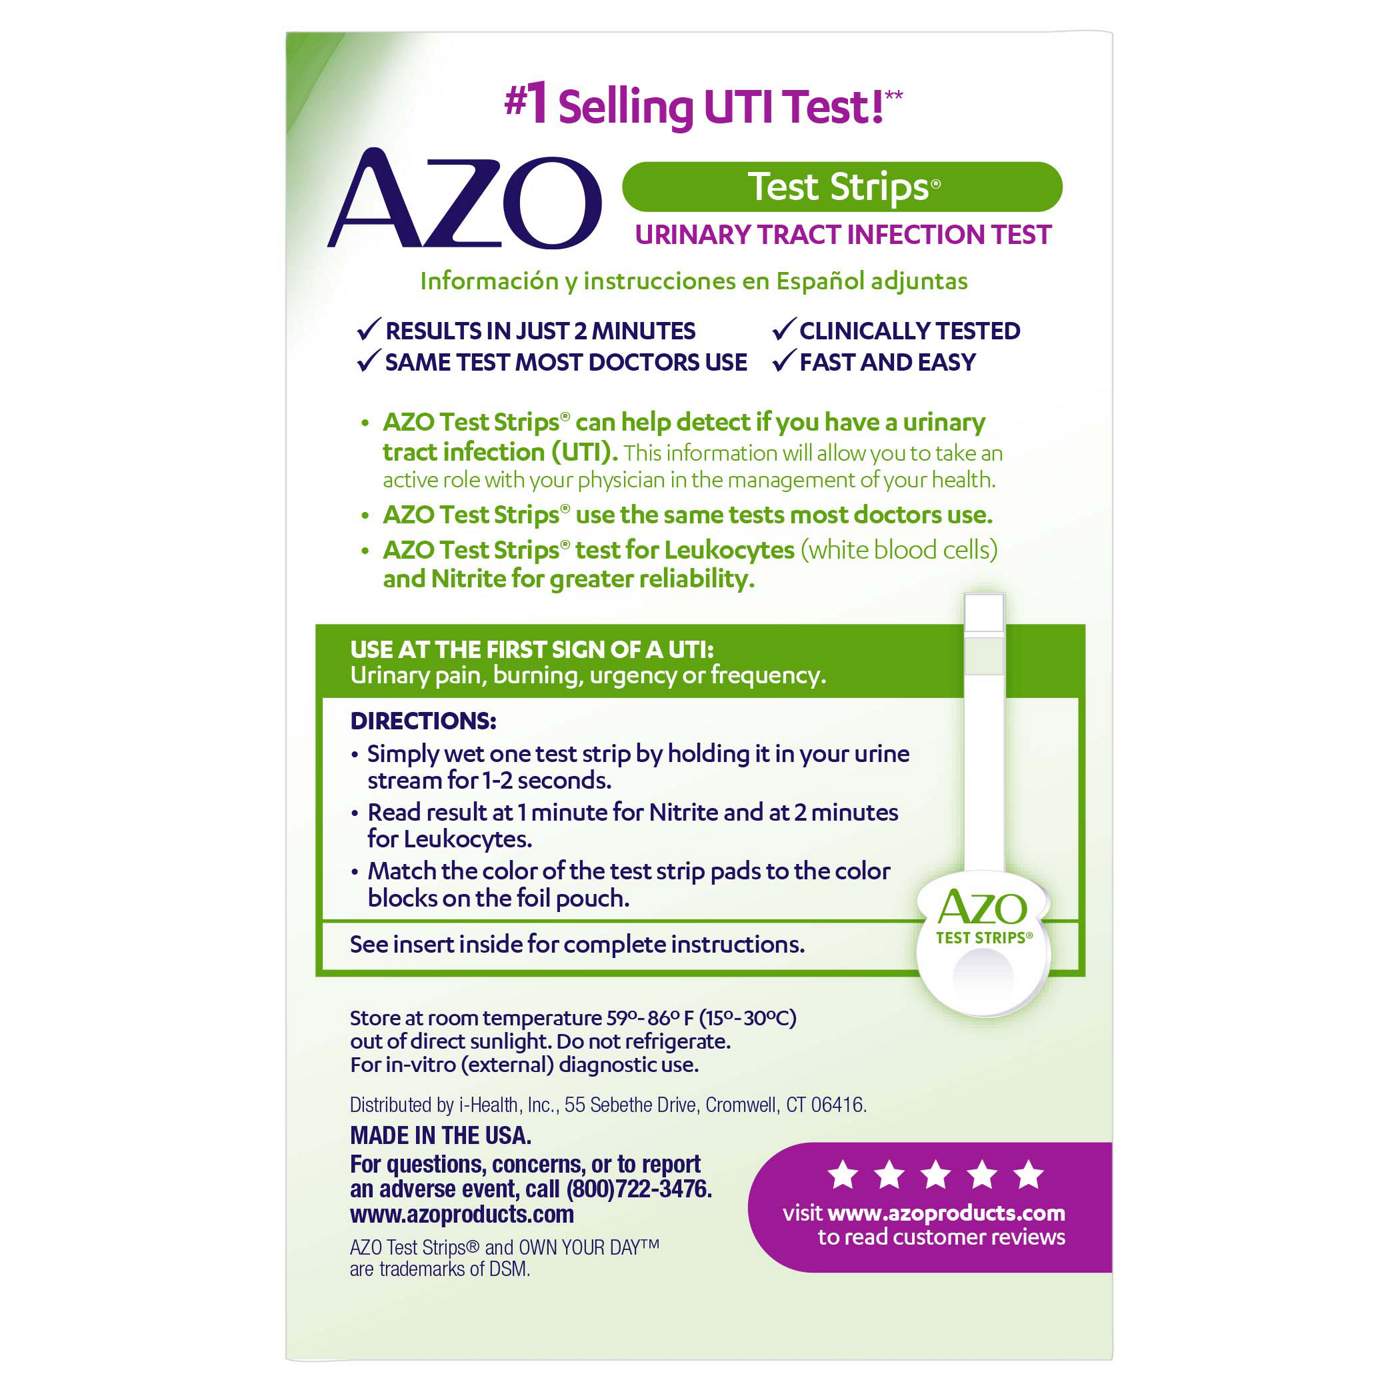 Azo Urinary Tract Infection Test Strips; image 3 of 6